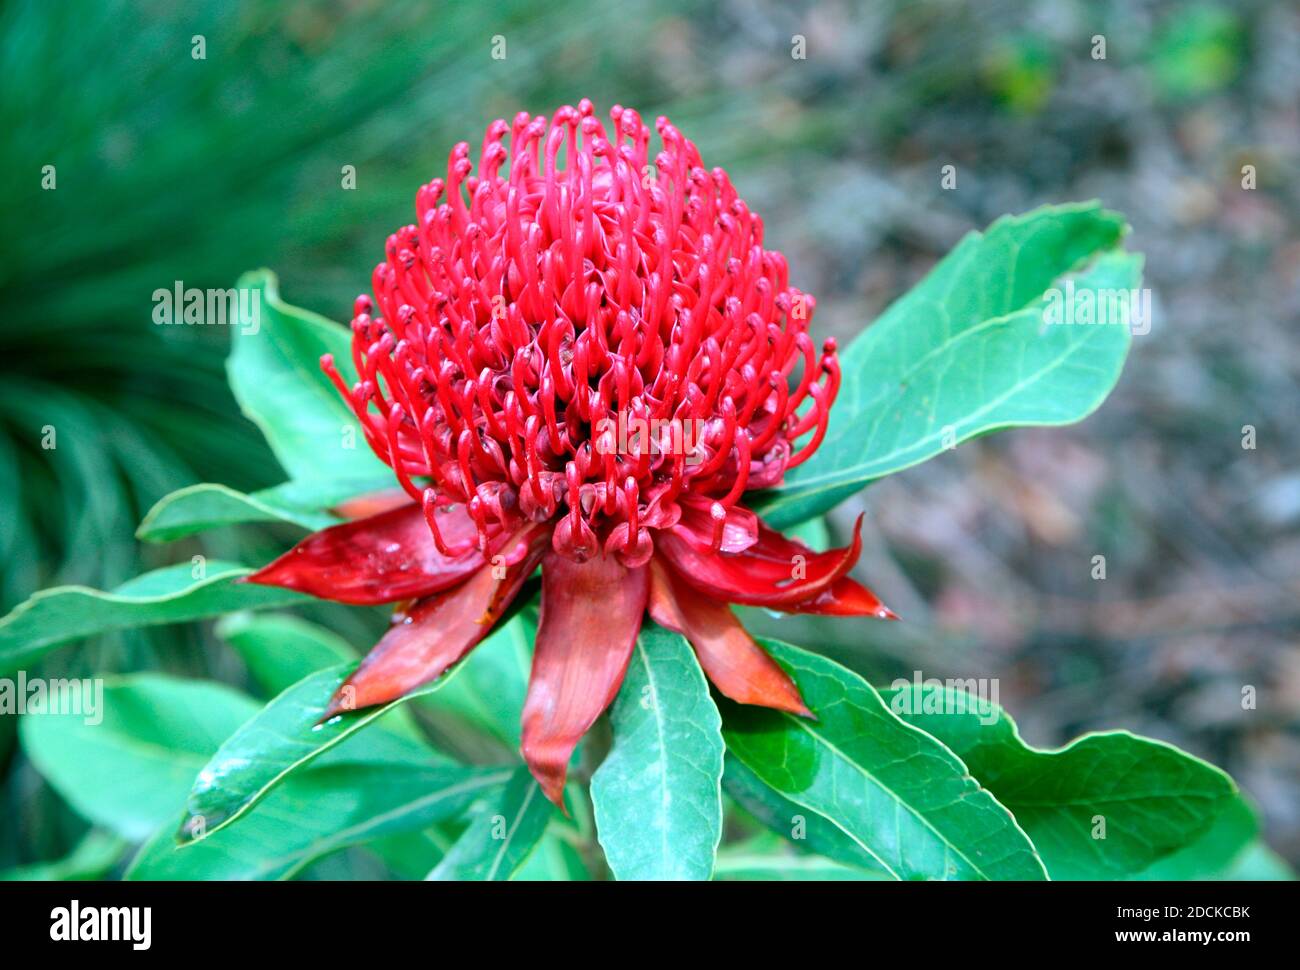 Waratah red flower native bush flower in Australia and state emblem of New South Wales Stock Photo